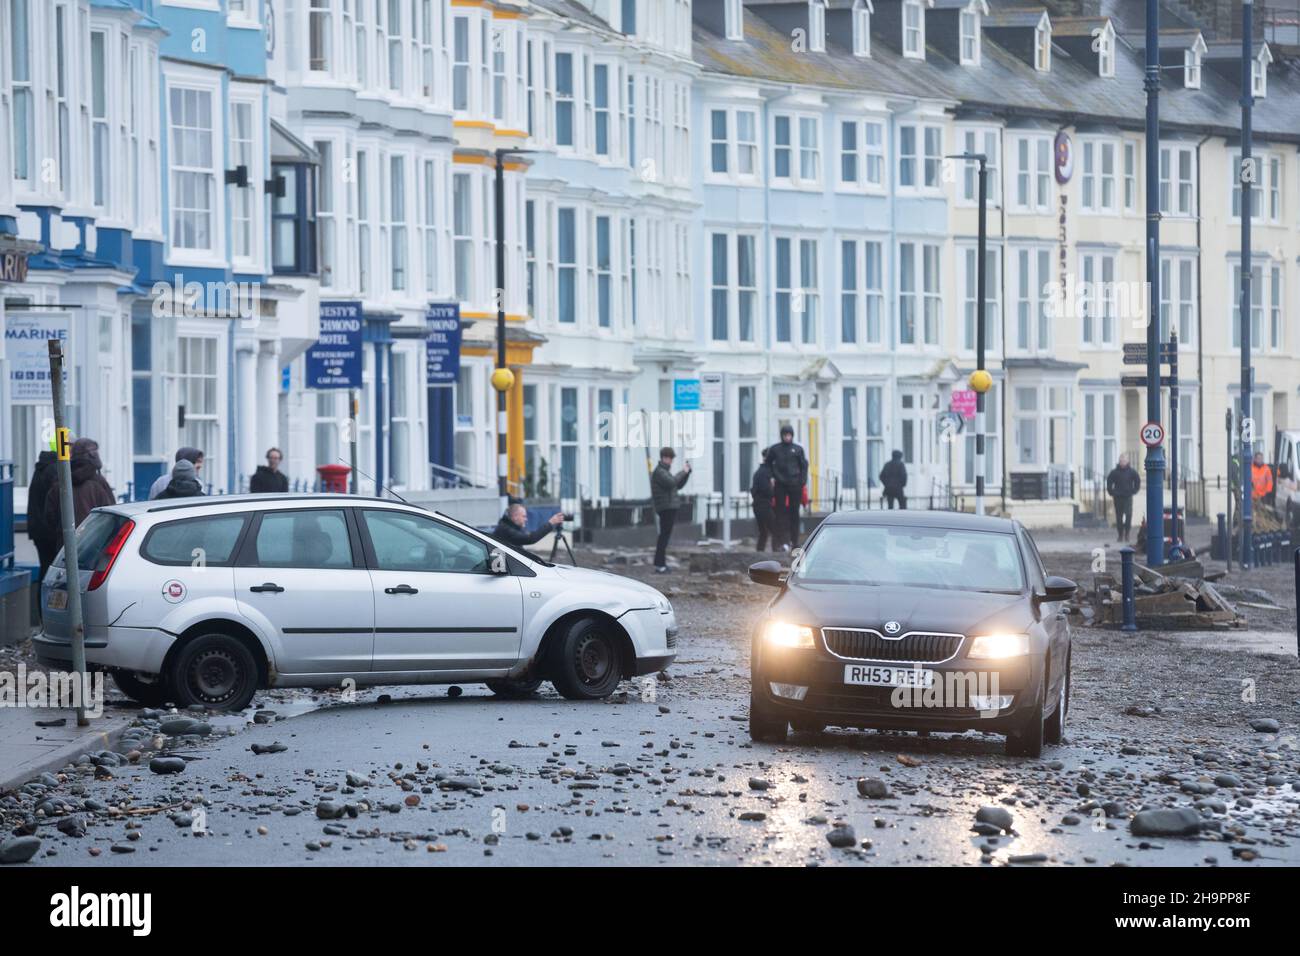 Aberystwyth, Ceredigion, Wales, UK. 08th December 2021  UK Weather: Debris strewn across the road from Storm Barra and coastal waves, as the strong winds continue to batter the promenade along the west coast of Aberystwyth this morning. © Ian Jones/Alamy Live News Stock Photo